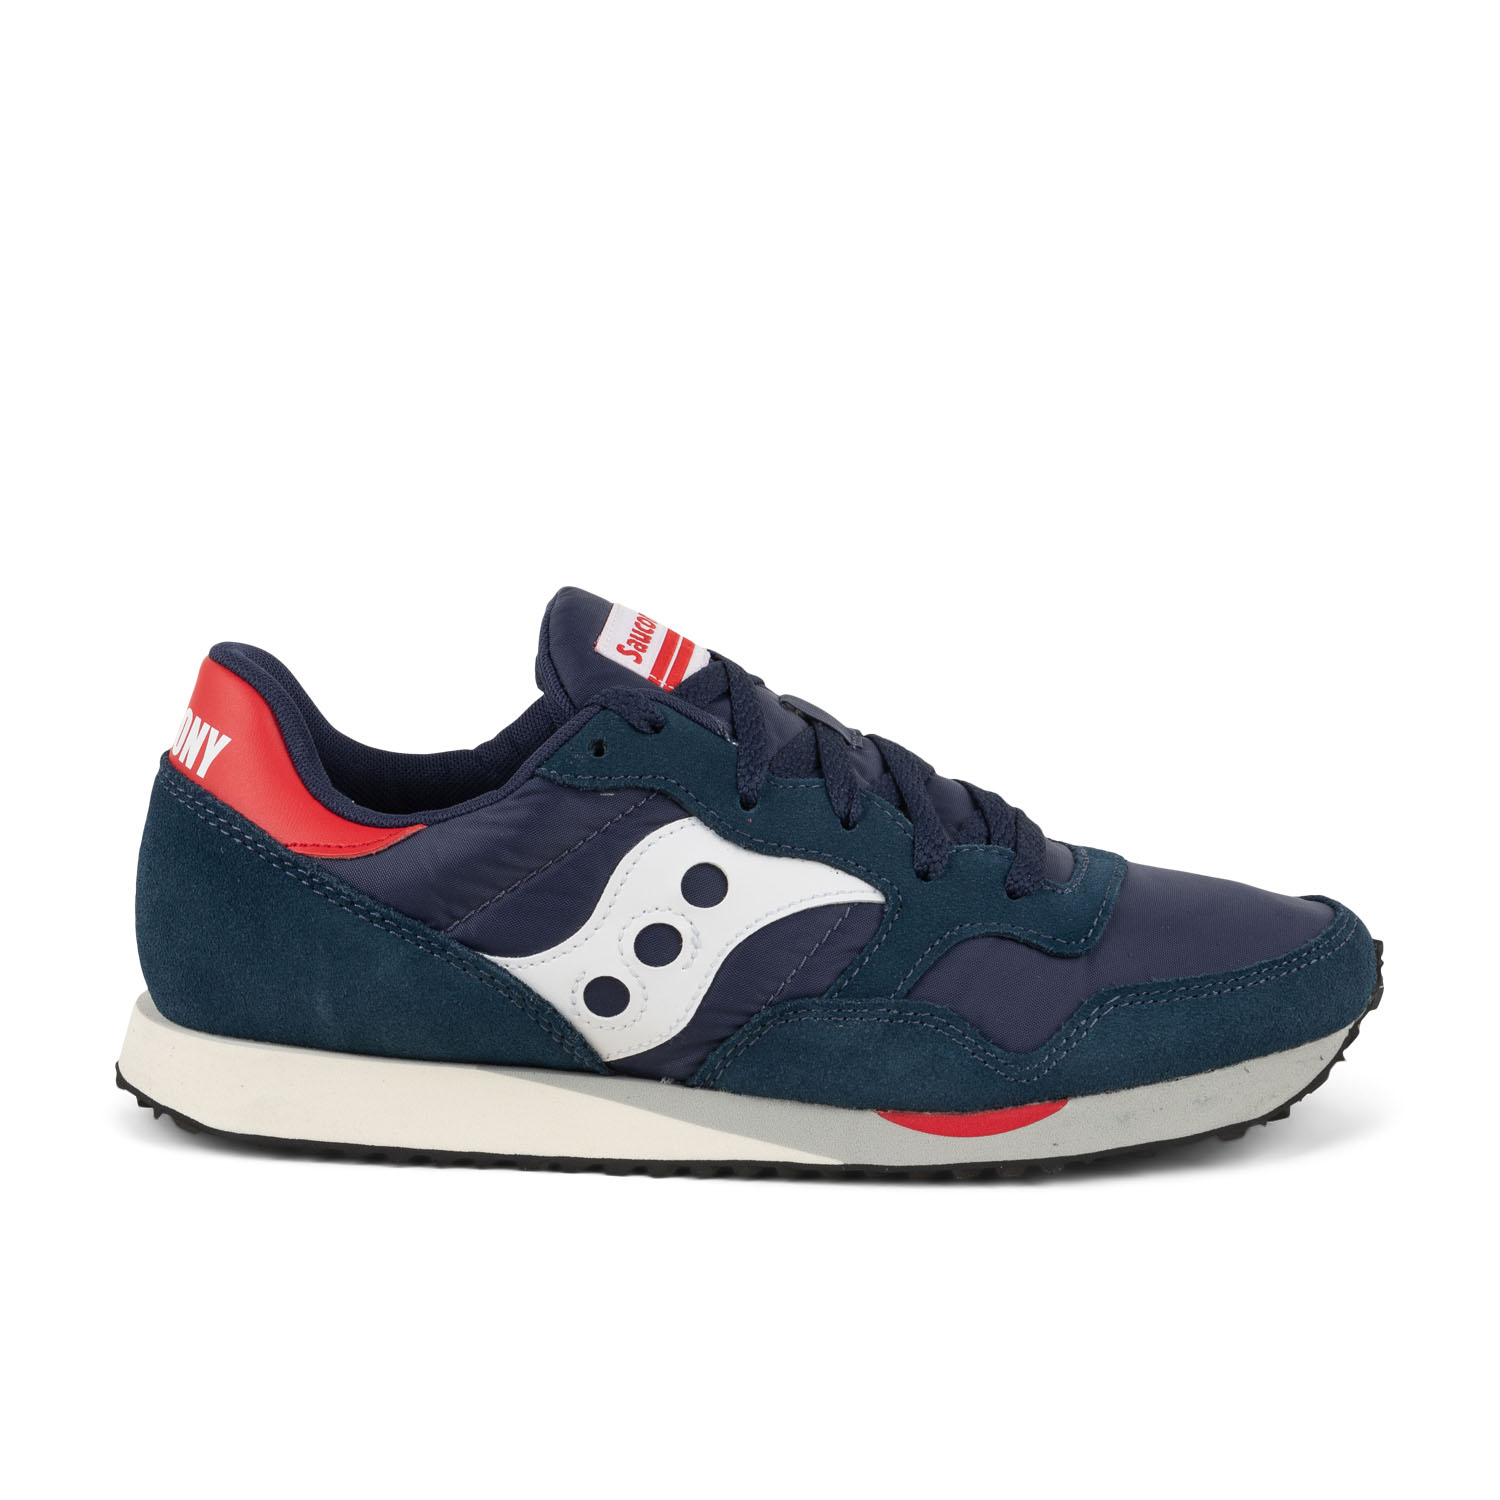 01 - DX TRAINER - SAUCONY - Baskets - Cuir / synthétique